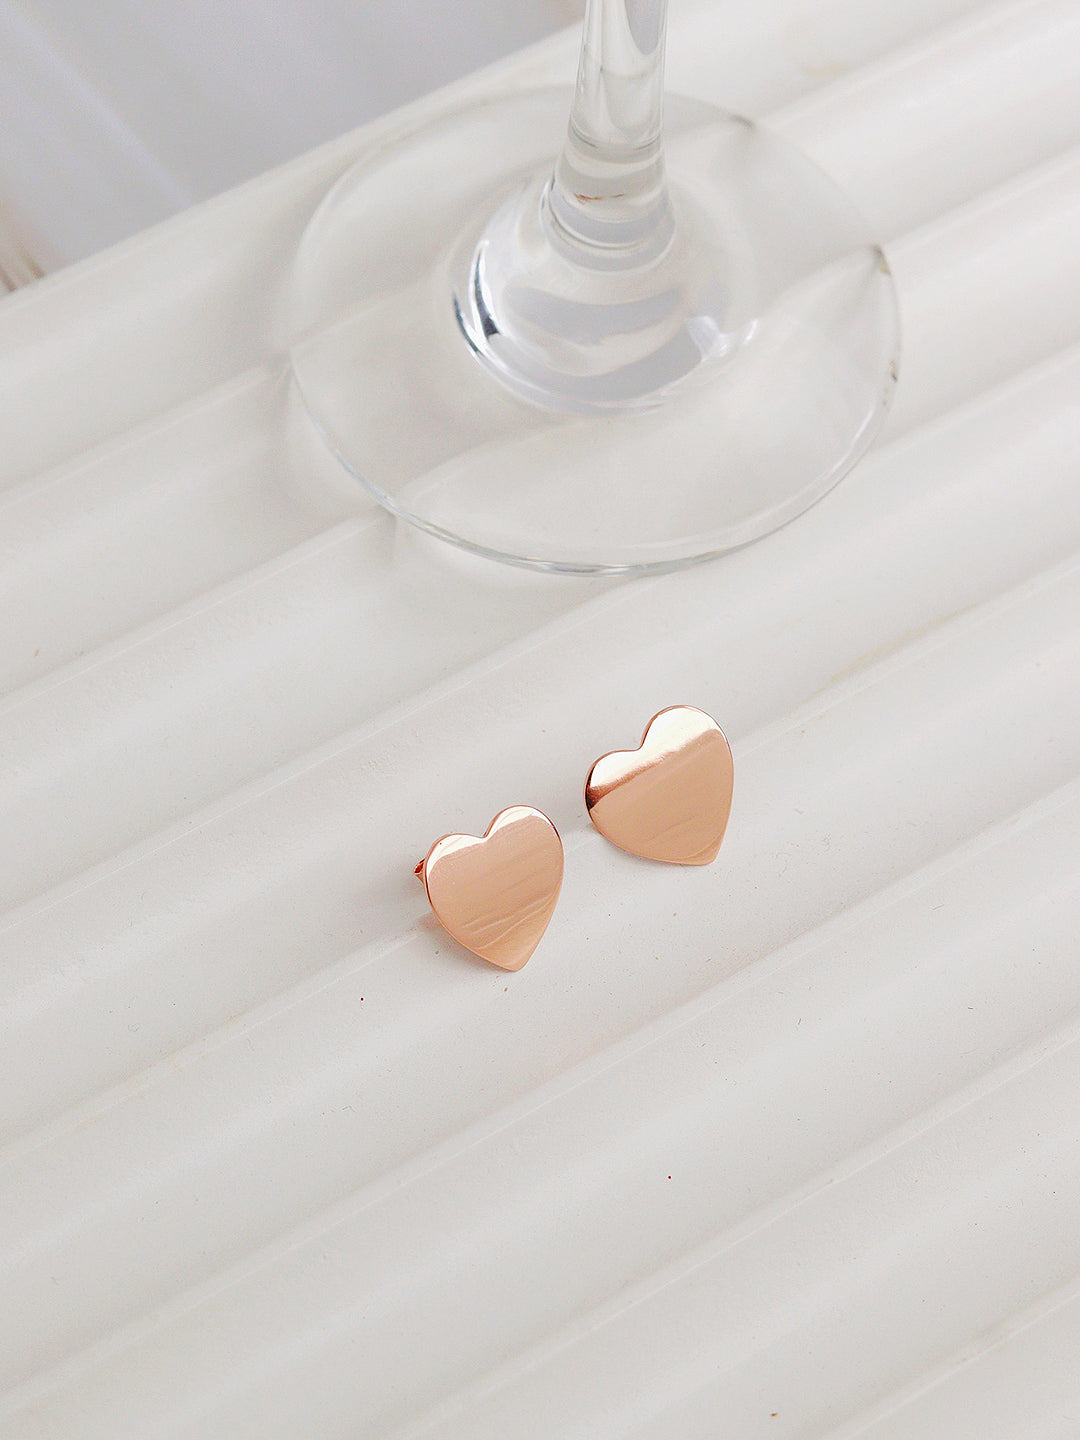 925 Silver Rose Gold Platted Heart Stud Earring 